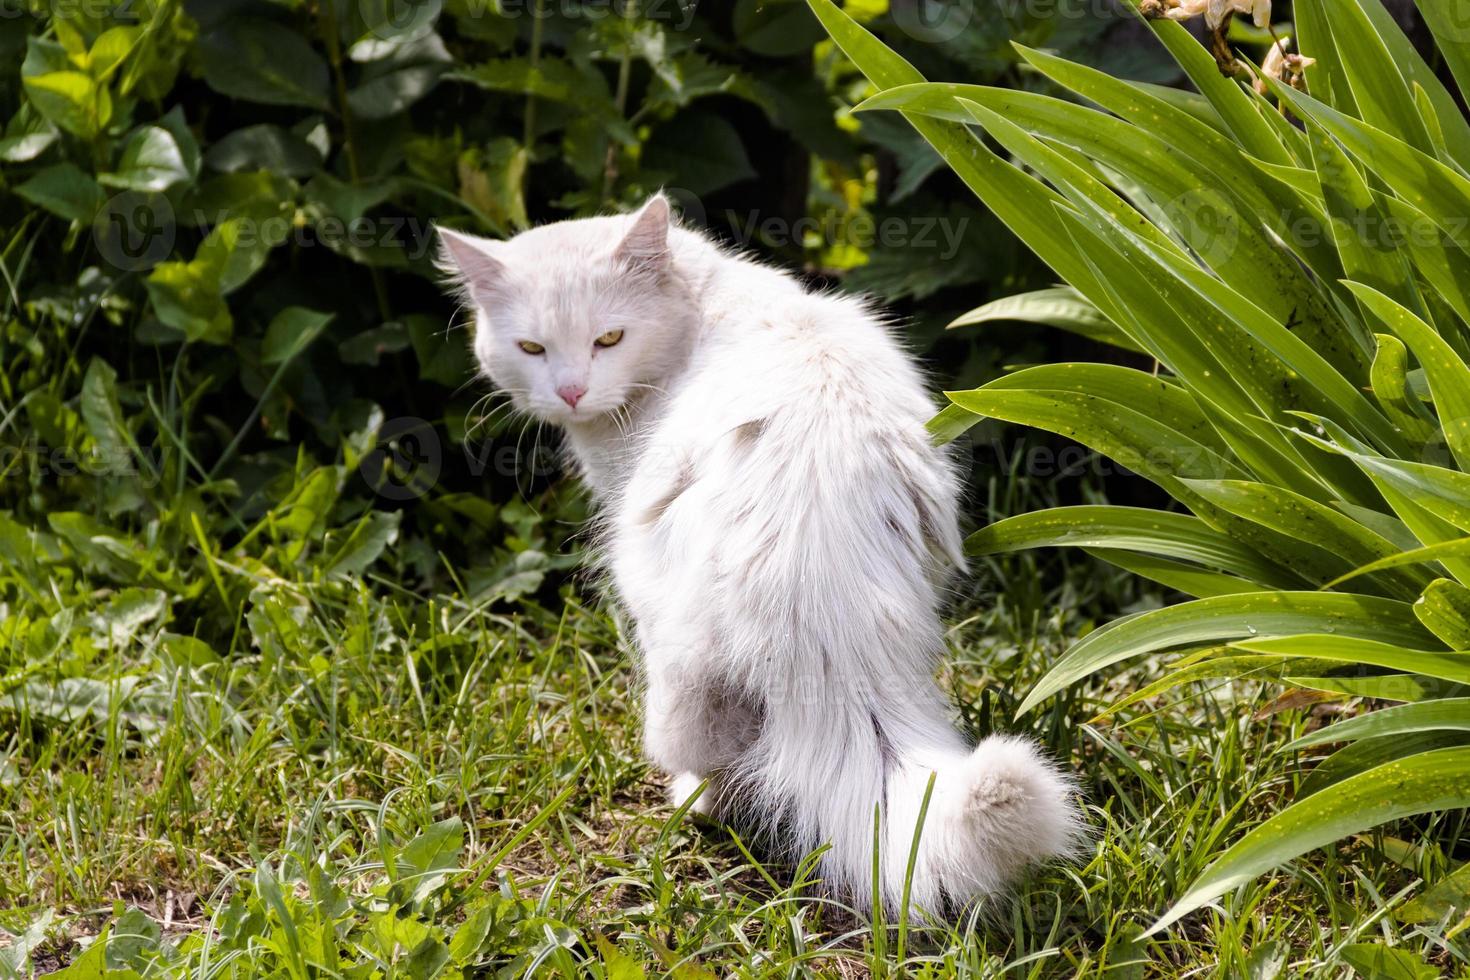 White cat on grass green outdoor sunny day photo